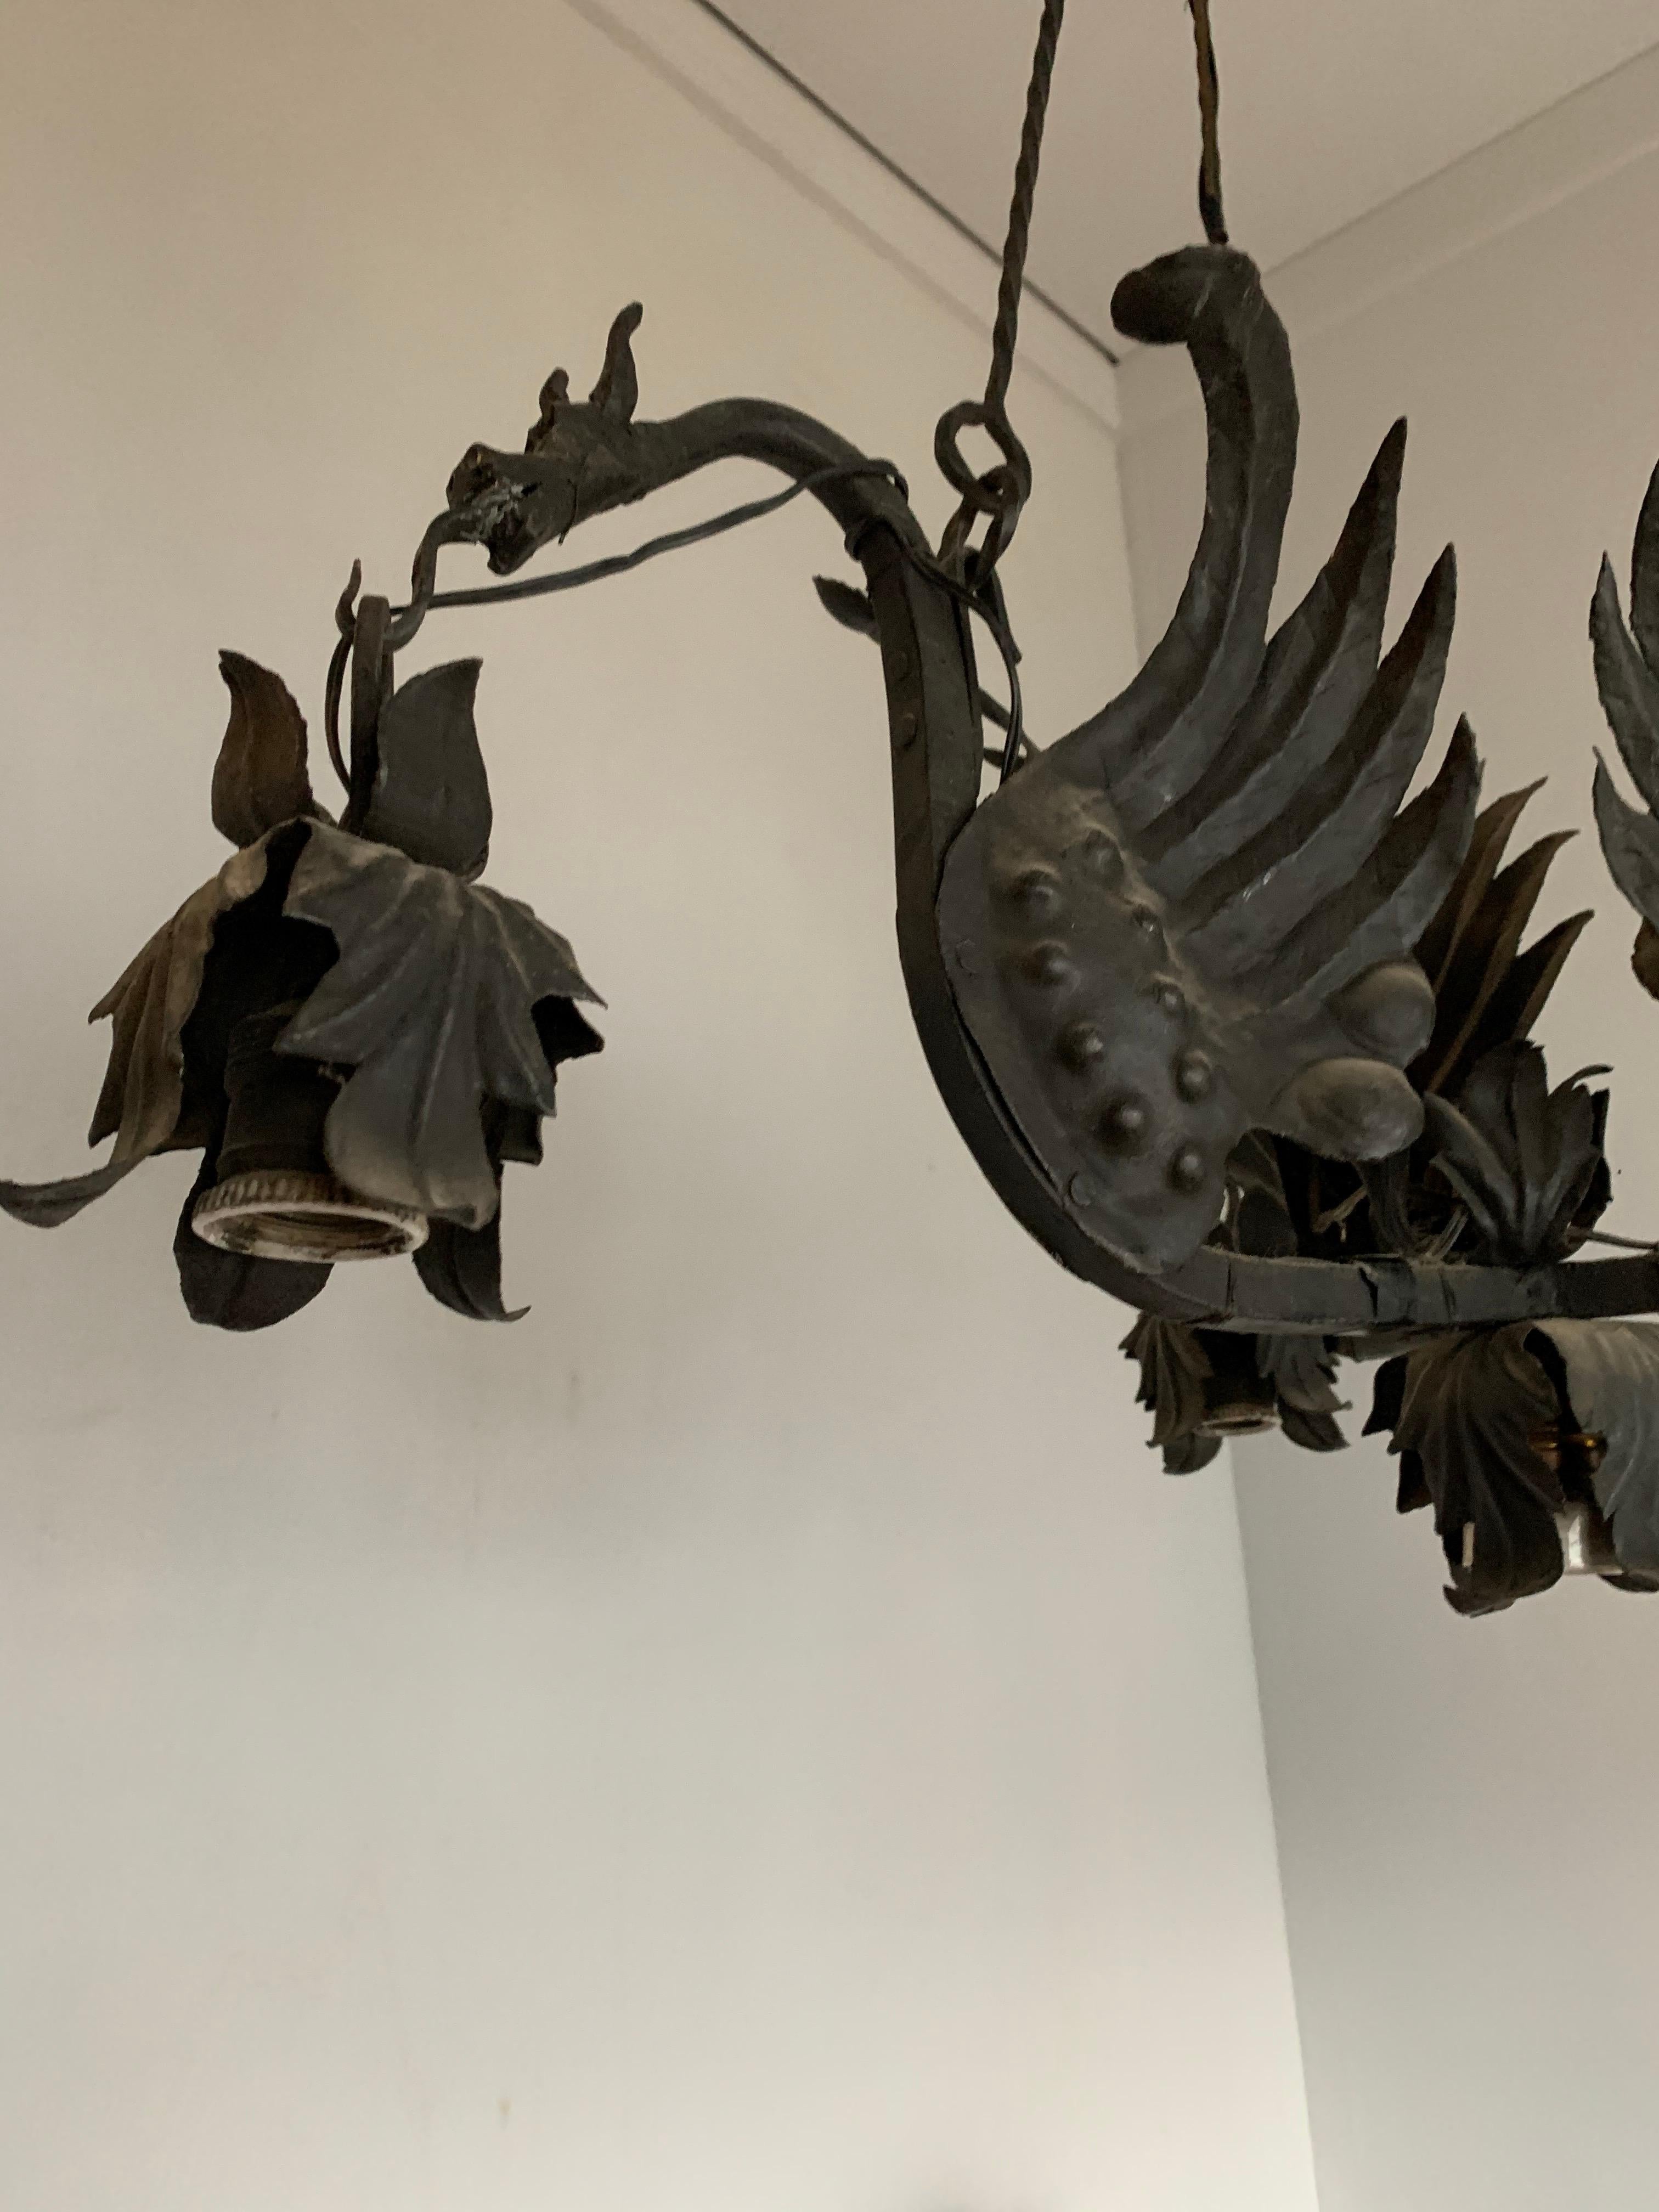 Forged Awesome Italian Pendant / Metal Art Light Fixture with Flying Dragon Sculptures